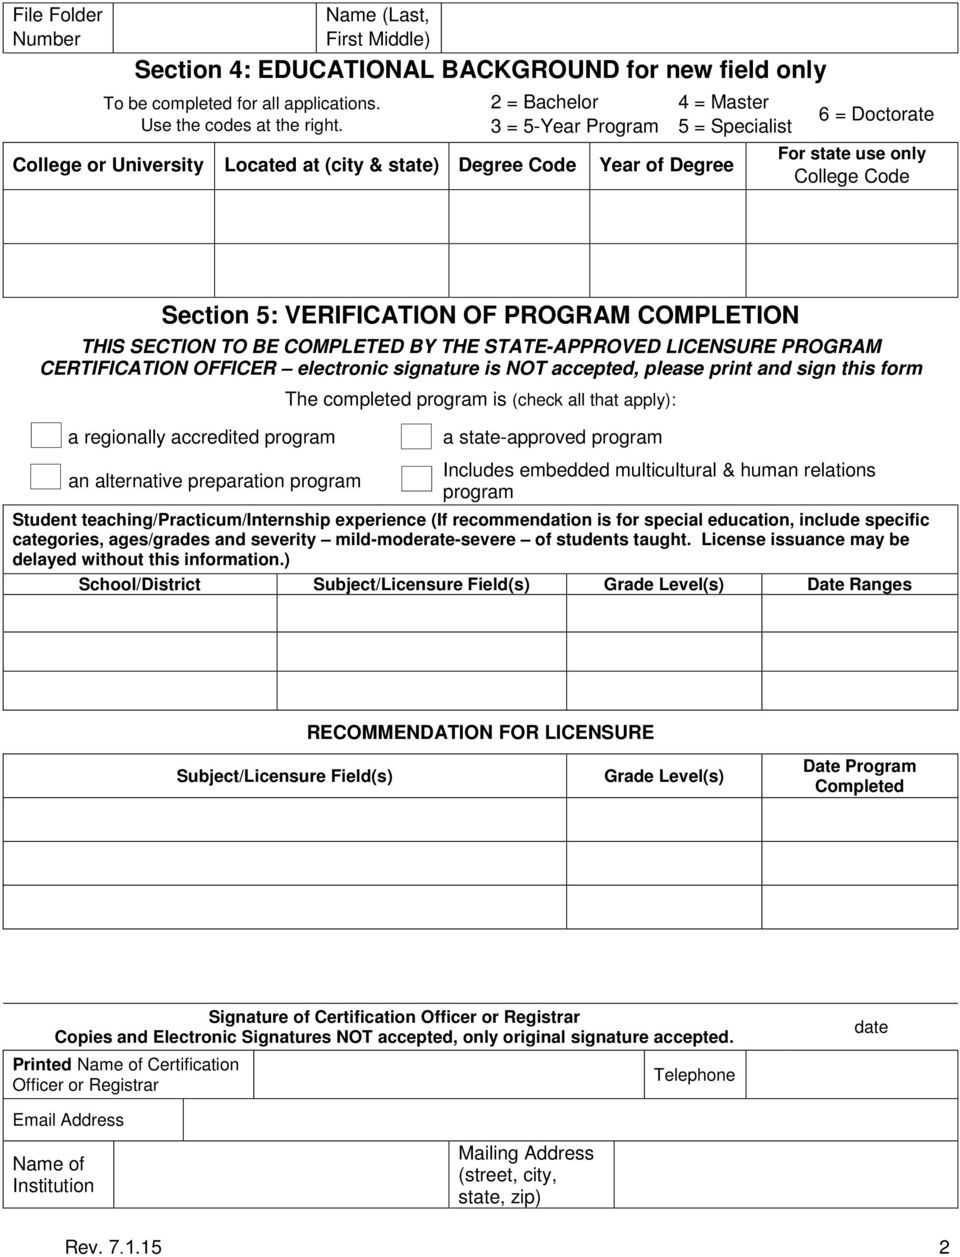 VERIFICATION OF PROGRAM COMPLETION THIS SECTION TO BE COMPLETED BY THE STATE-APPROVED LICENSURE PROGRAM CERTIFICATION OFFICER electronic signature is T accepted, please print and sign this form The